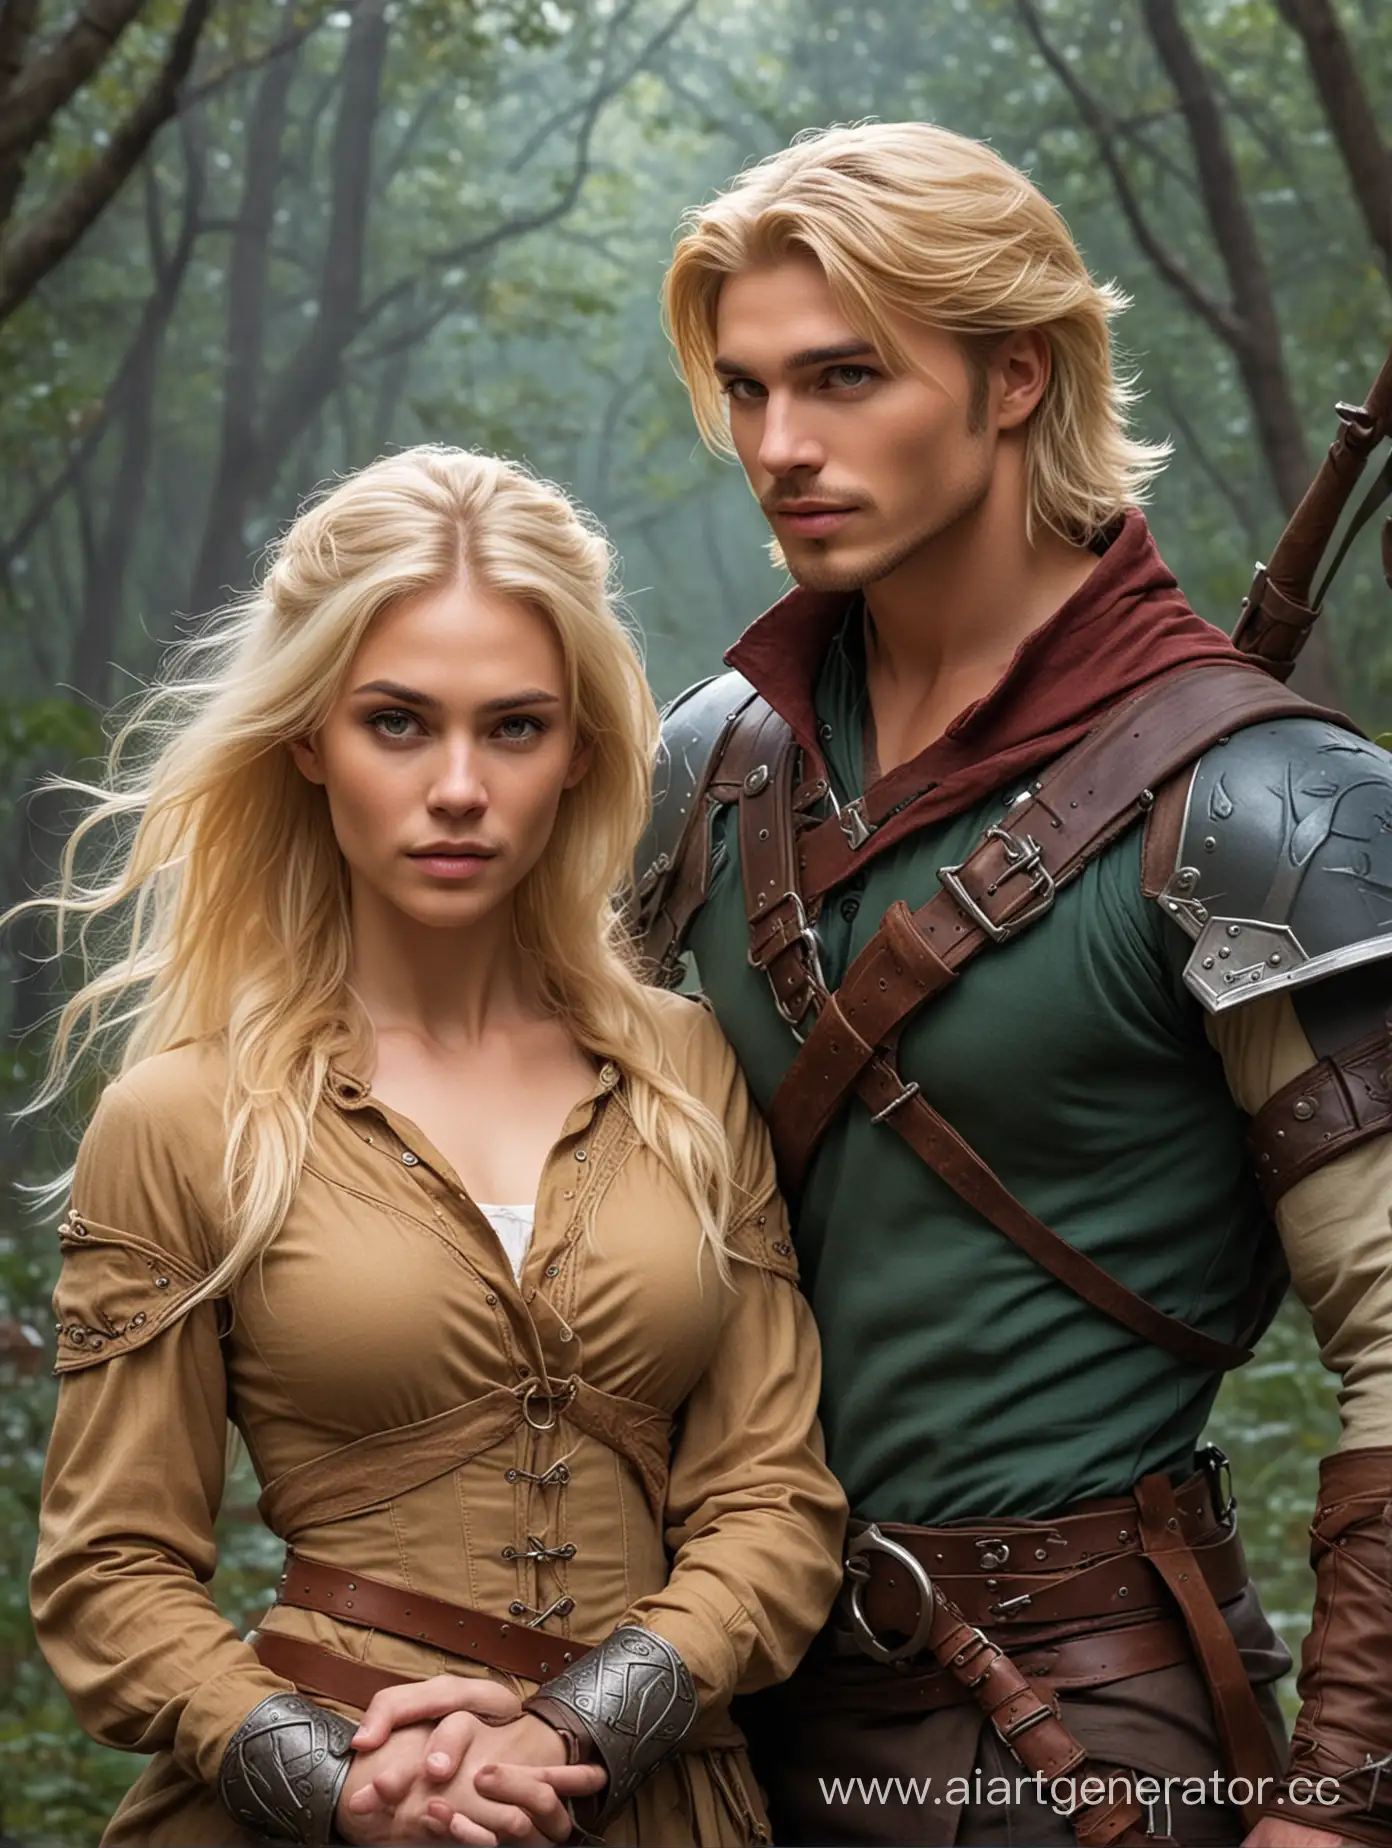 Epic-Romance-Strong-Female-Mage-and-Blond-Male-Ranger-in-a-Fantasy-World